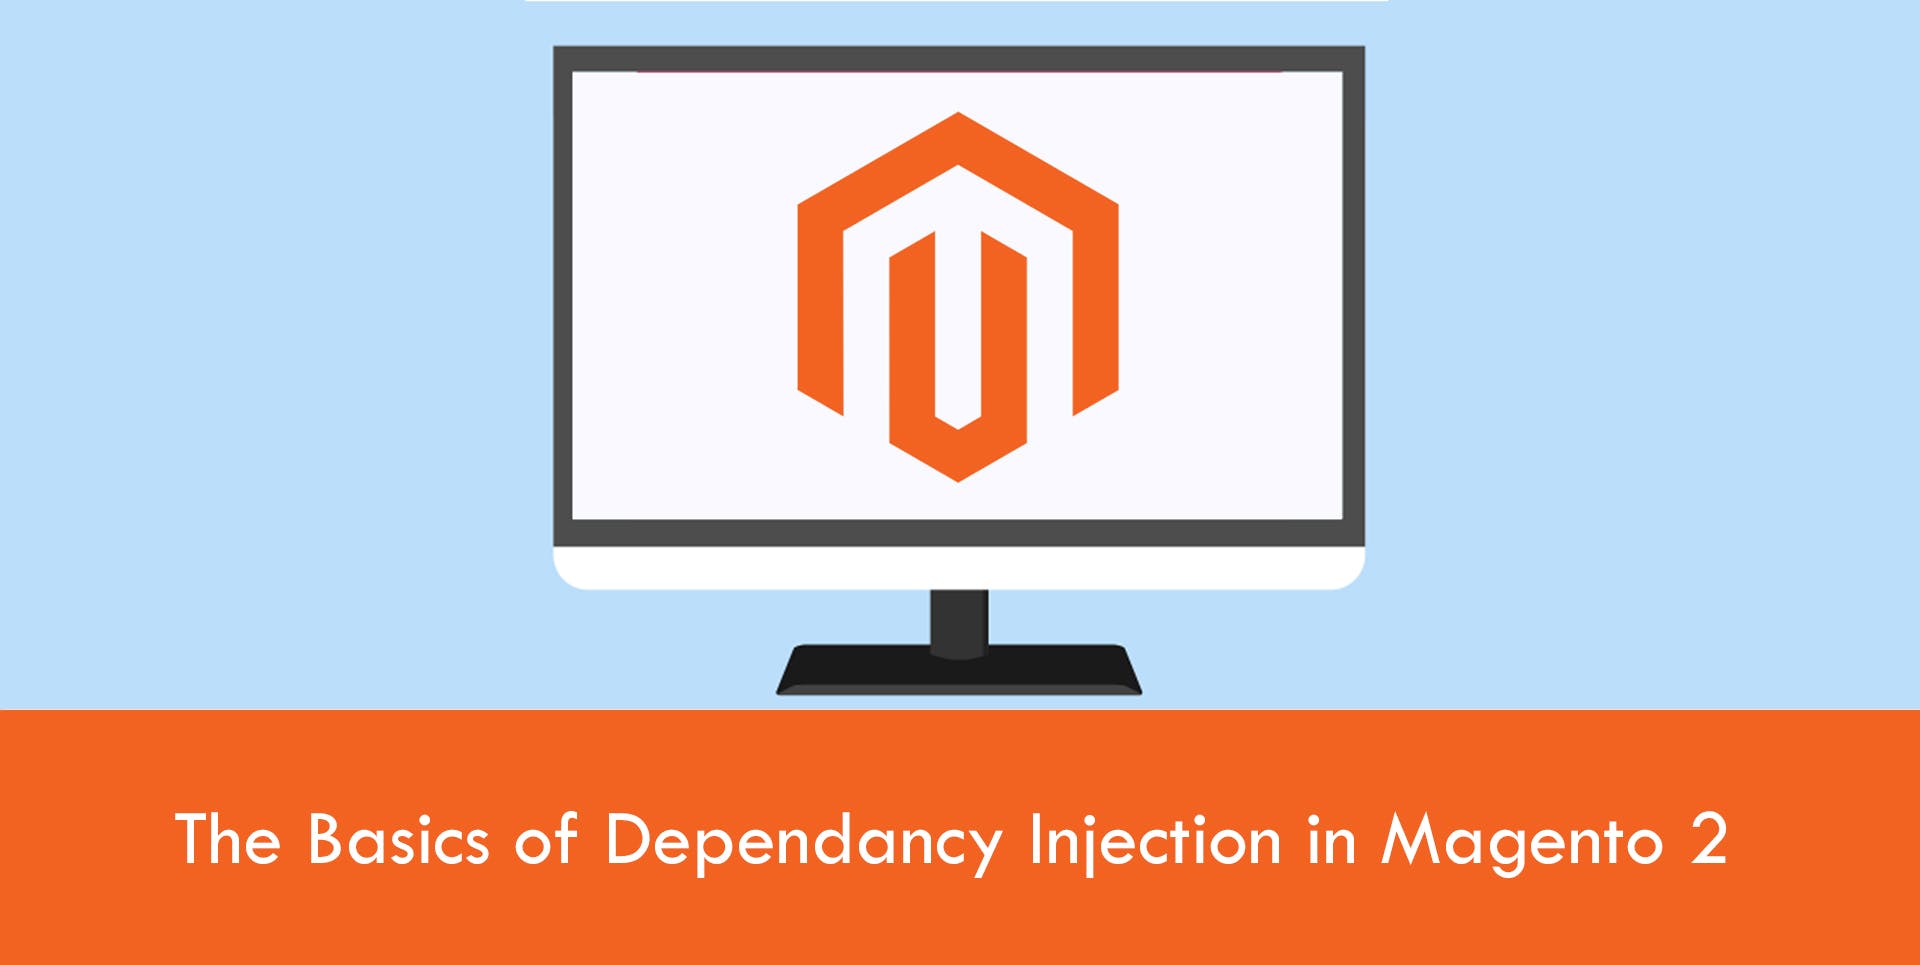 The Basics of Dependancy Injection in Magento 2